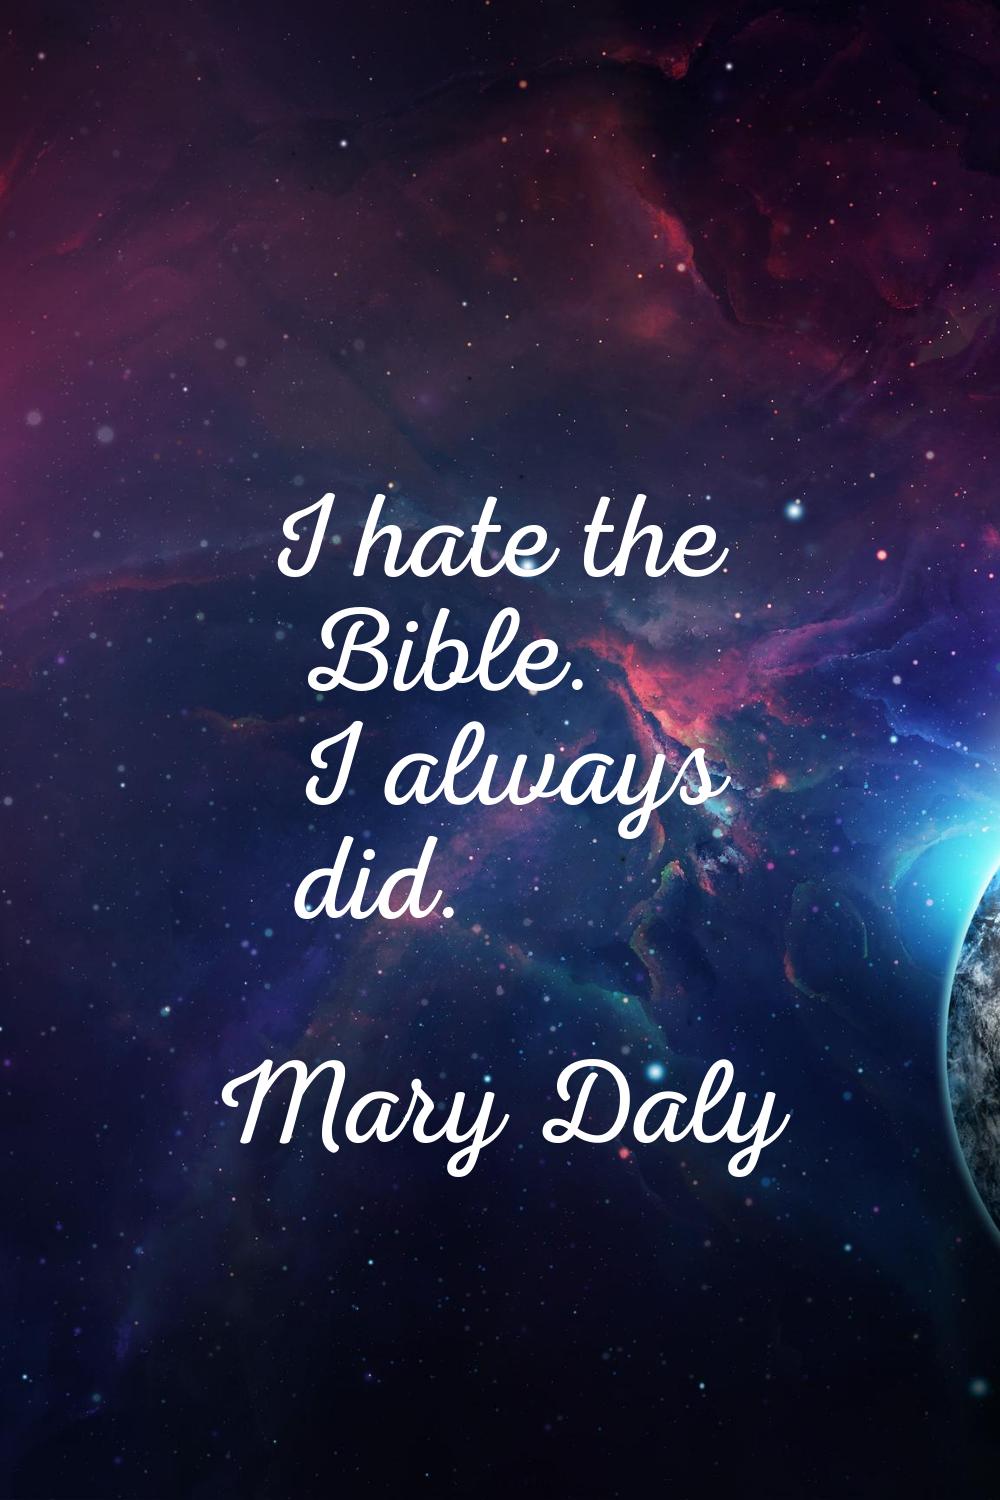 I hate the Bible. I always did.